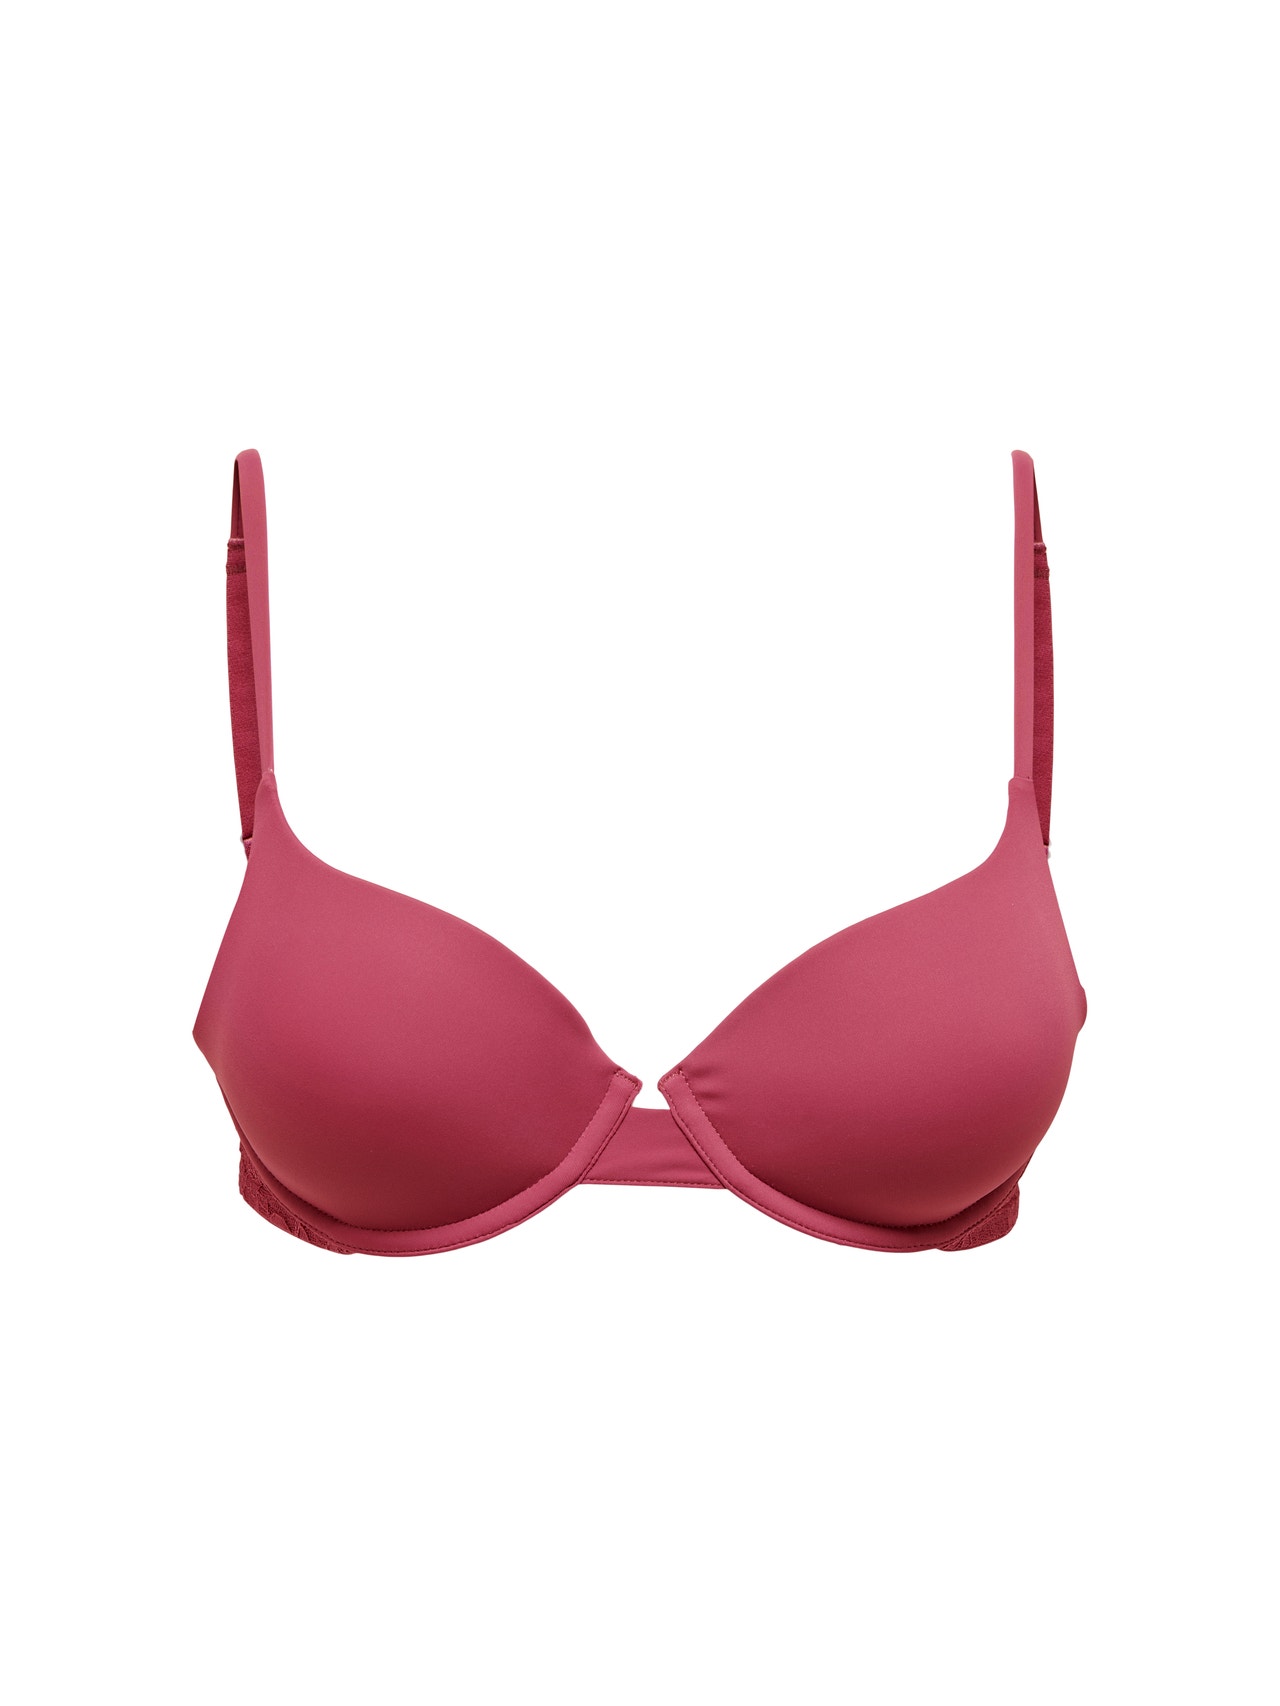 https://images.only.com/15267704/4005031/001/only-t-shirtbra-purple.jpg?v=fe9595e4a5e8ebf2ed4c9c6cd832c418&format=webp&width=1280&quality=90&key=25-0-3